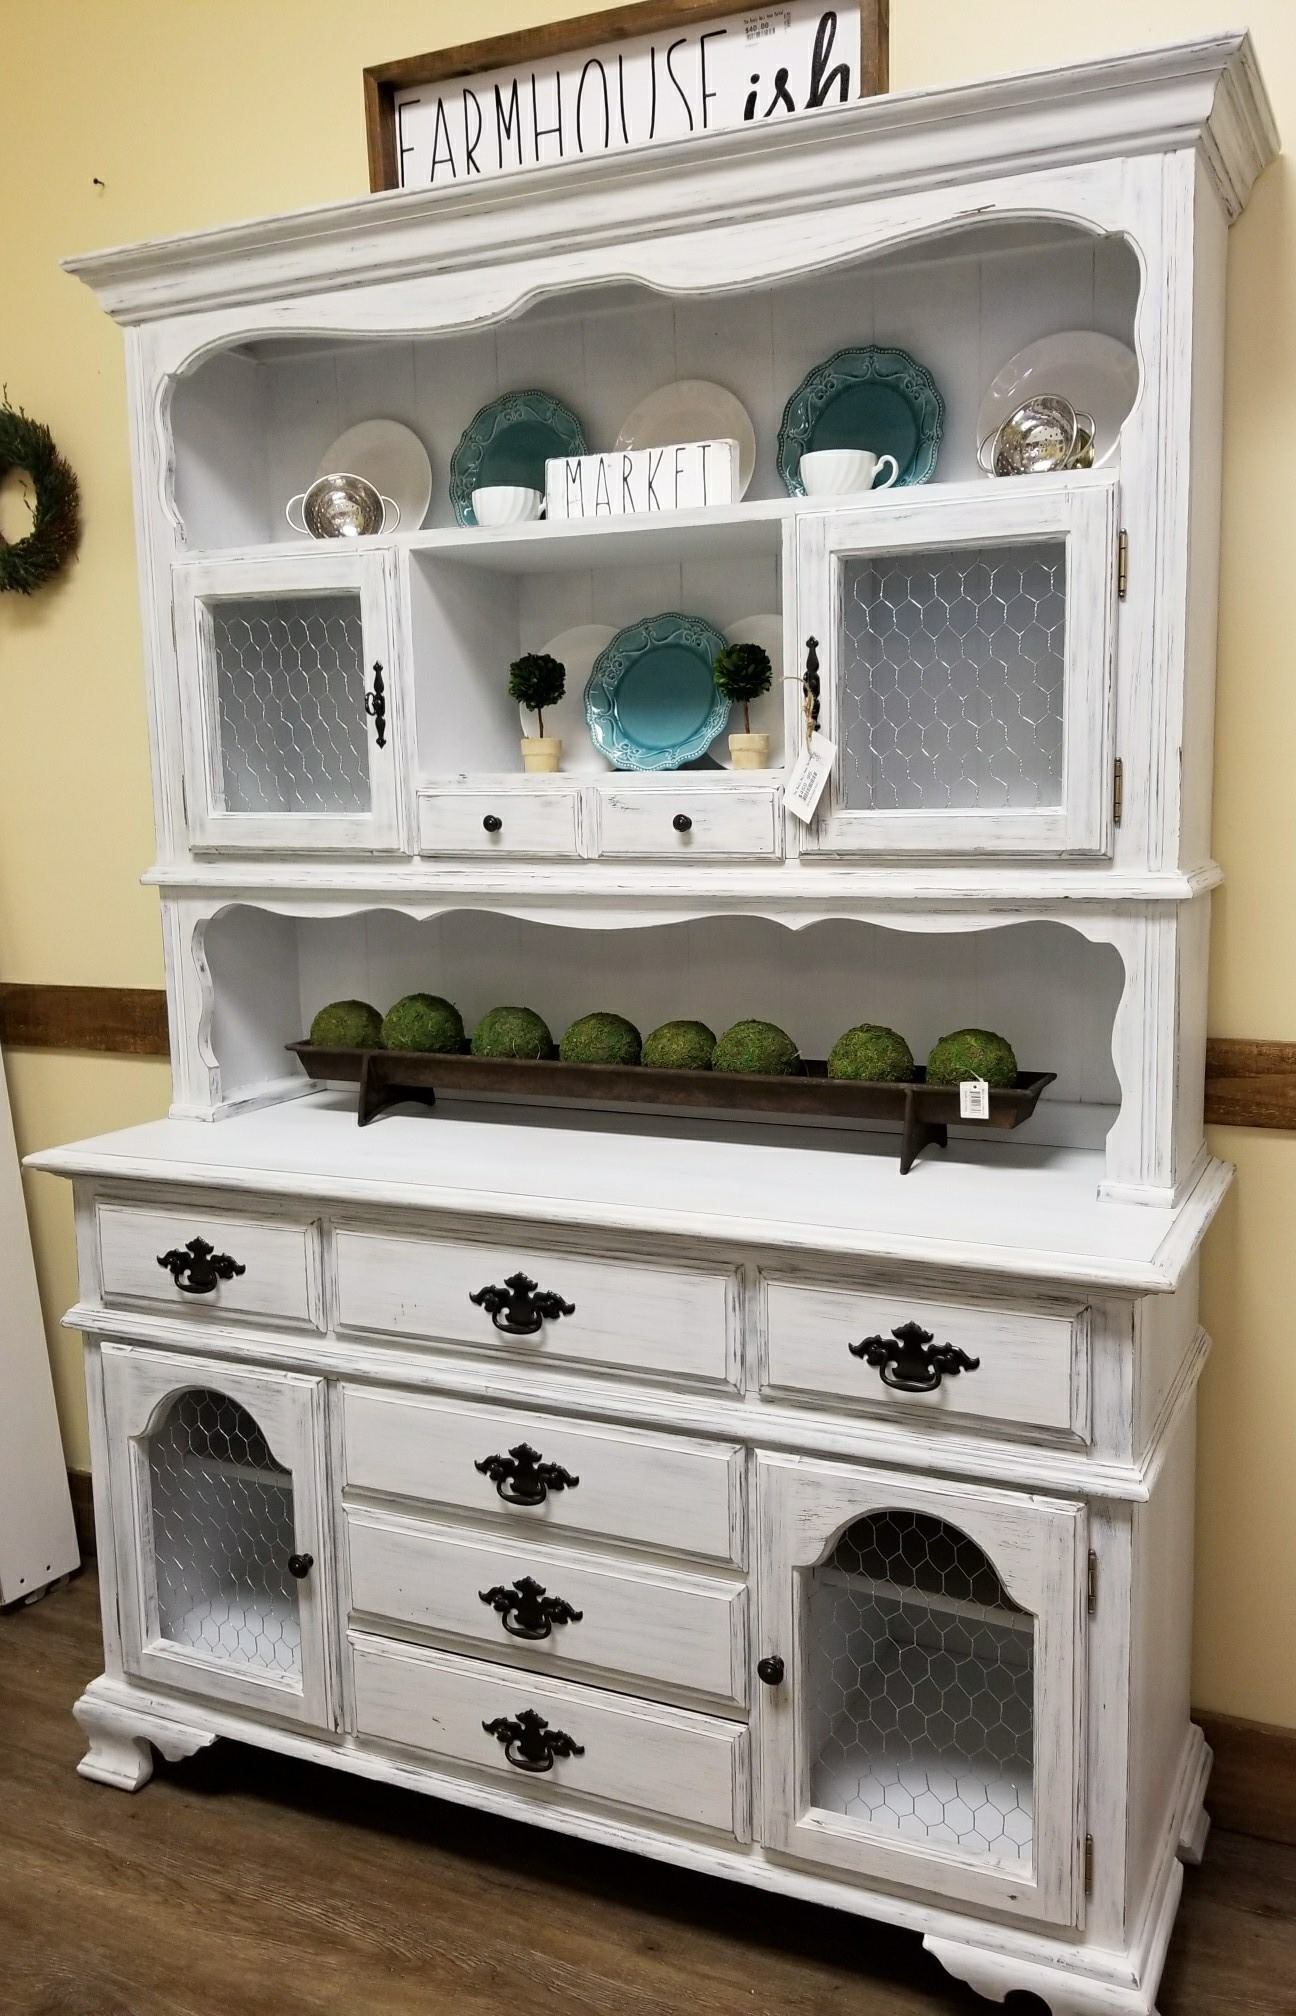 Chalk Painted Hutch and China Cabinet Ideas to inspire you